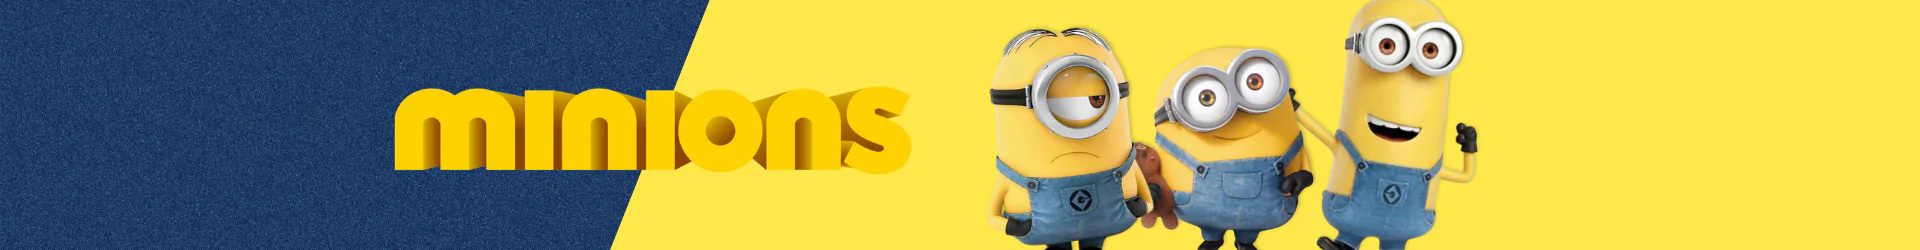 Minions (Gru) puzzles banner